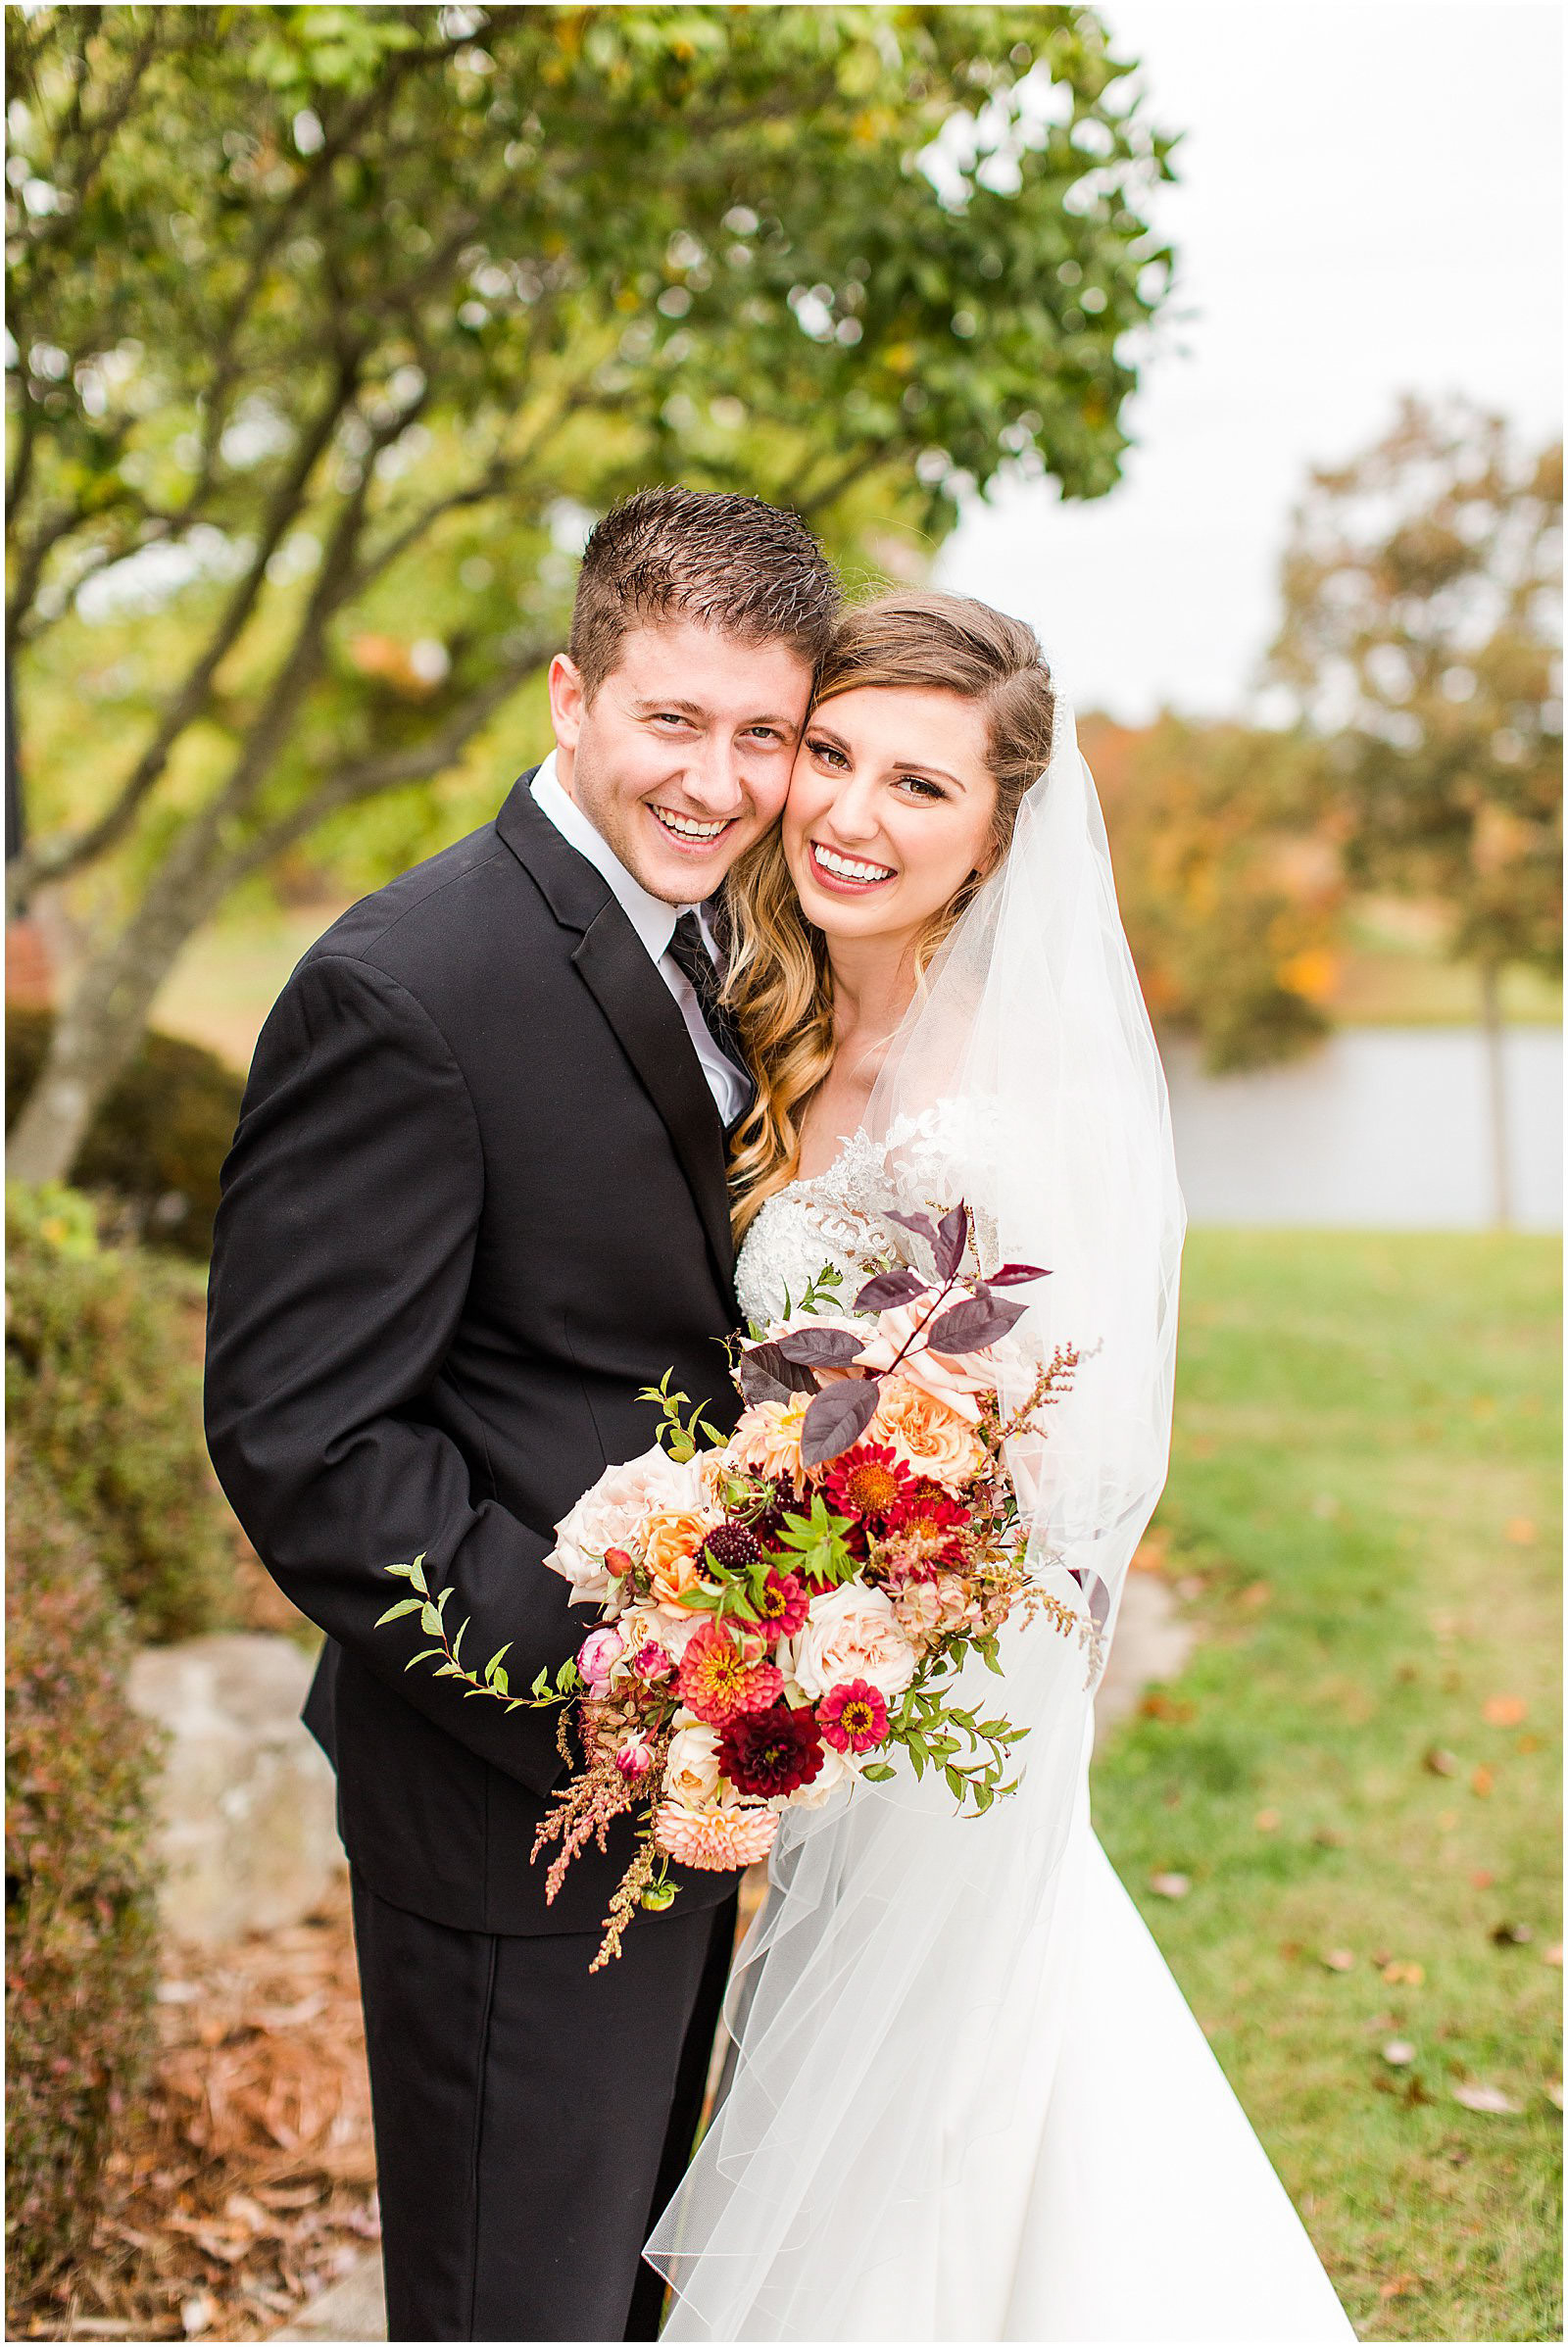 A Romantic Fall Wedding in Ferdinand, IN | Tori and Kyle | Bret and Brandie Photography 0066-2.jpg